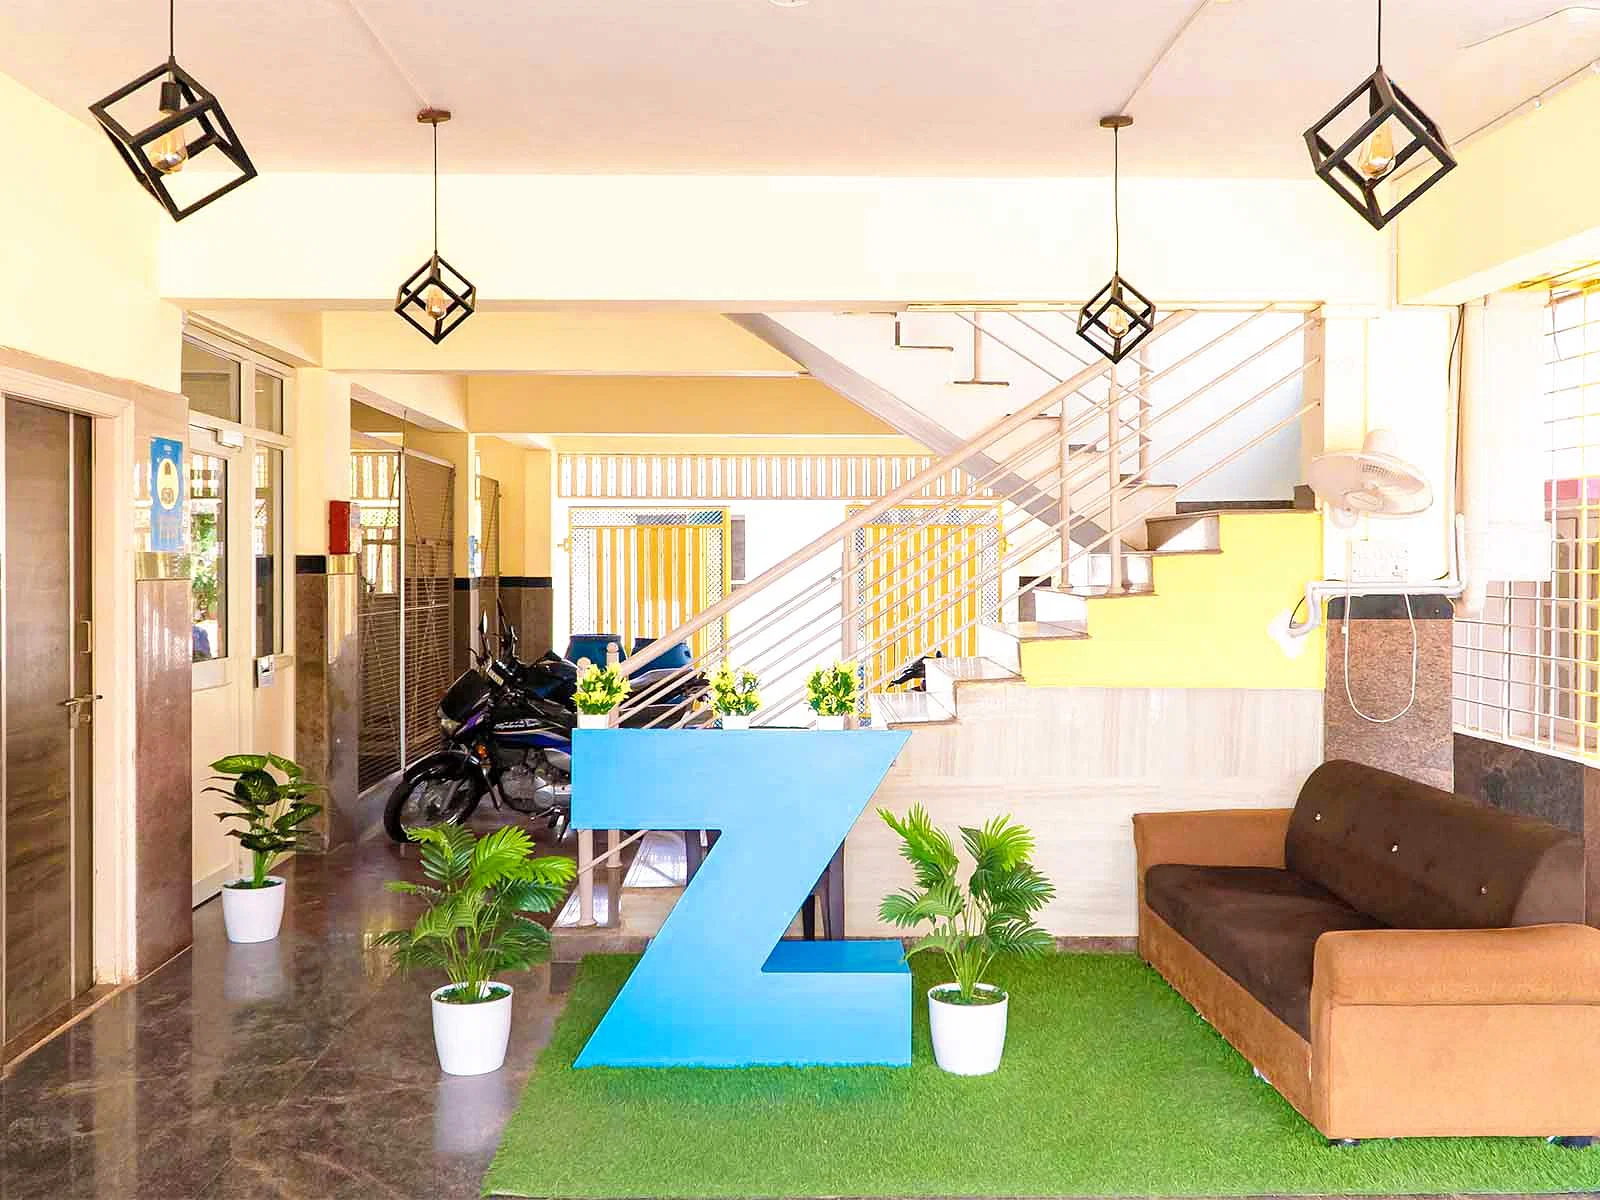 budget-friendly PGs and hostels for couple with single rooms with daily hopusekeeping-Zolo Cronos